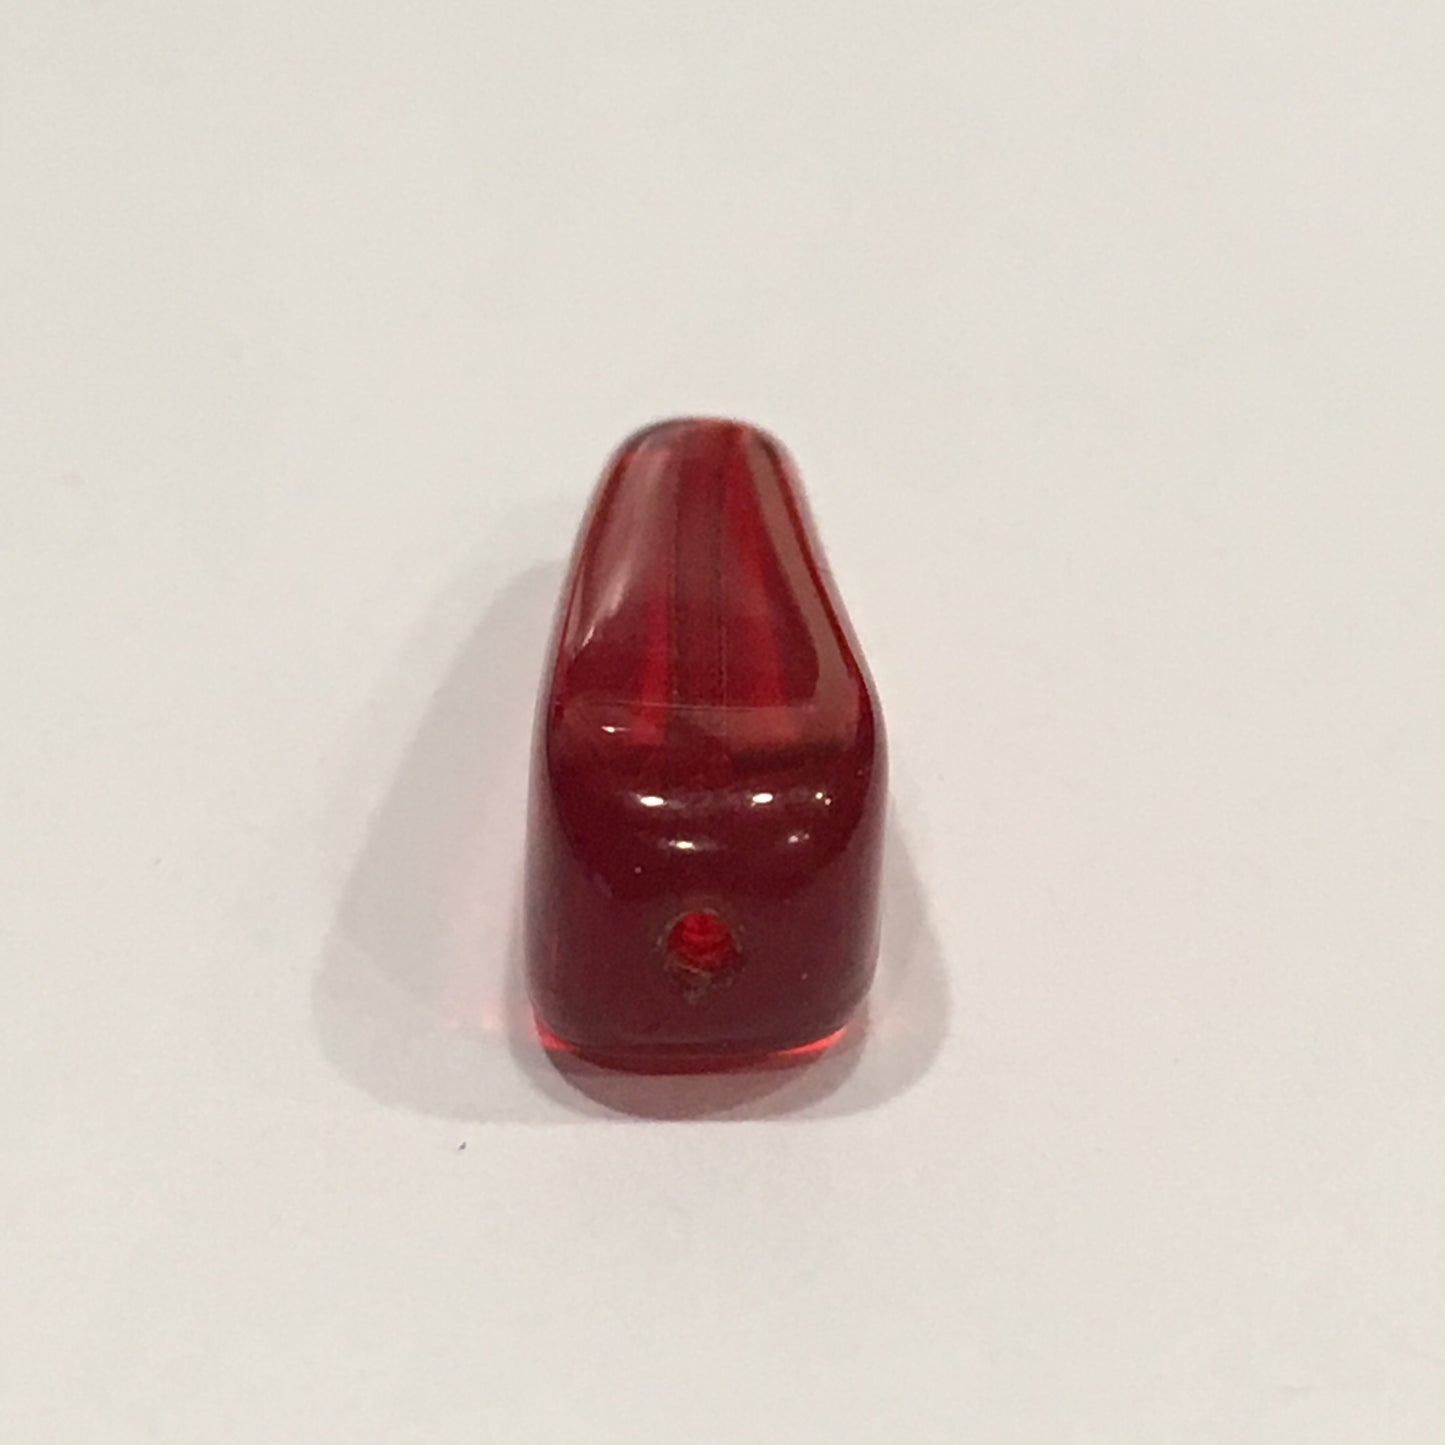 Transparent Ruby Red Glass Faceted Teardrop Pendant, 26 x 7.5 mm